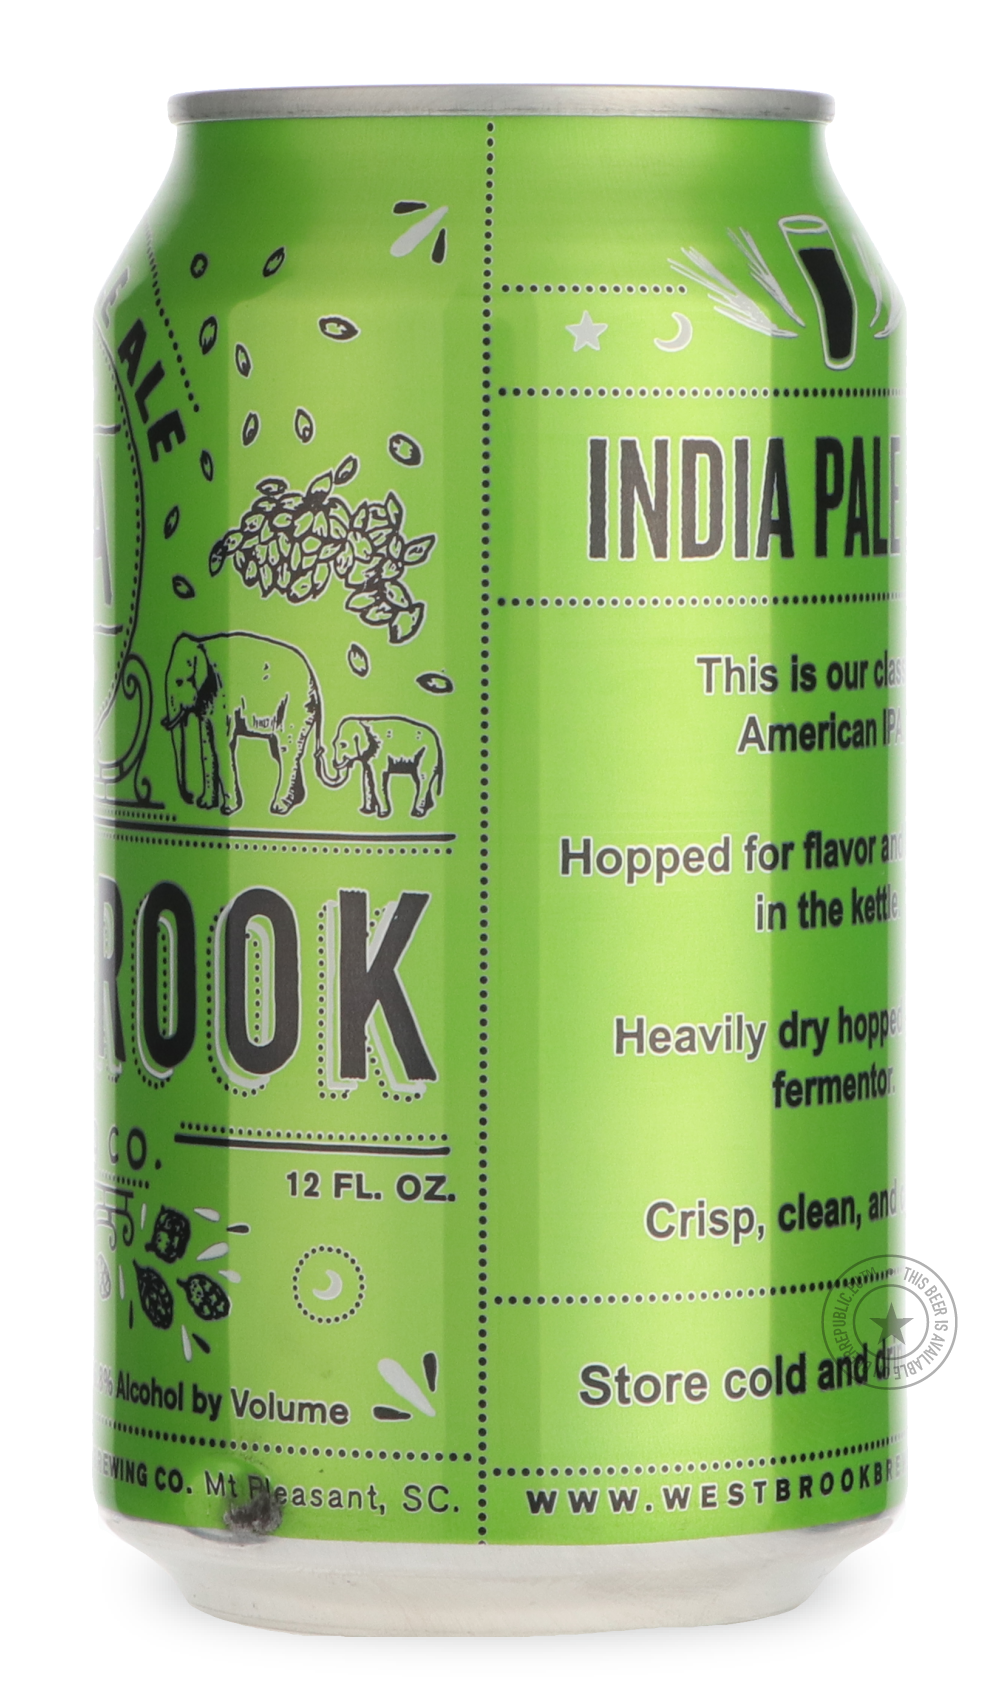 -Westbrook- IPA-IPA- Only @ Beer Republic - The best online beer store for American & Canadian craft beer - Buy beer online from the USA and Canada - Bier online kopen - Amerikaans bier kopen - Craft beer store - Craft beer kopen - Amerikanisch bier kaufen - Bier online kaufen - Acheter biere online - IPA - Stout - Porter - New England IPA - Hazy IPA - Imperial Stout - Barrel Aged - Barrel Aged Imperial Stout - Brown - Dark beer - Blond - Blonde - Pilsner - Lager - Wheat - Weizen - Amber - Barley Wine - Qua